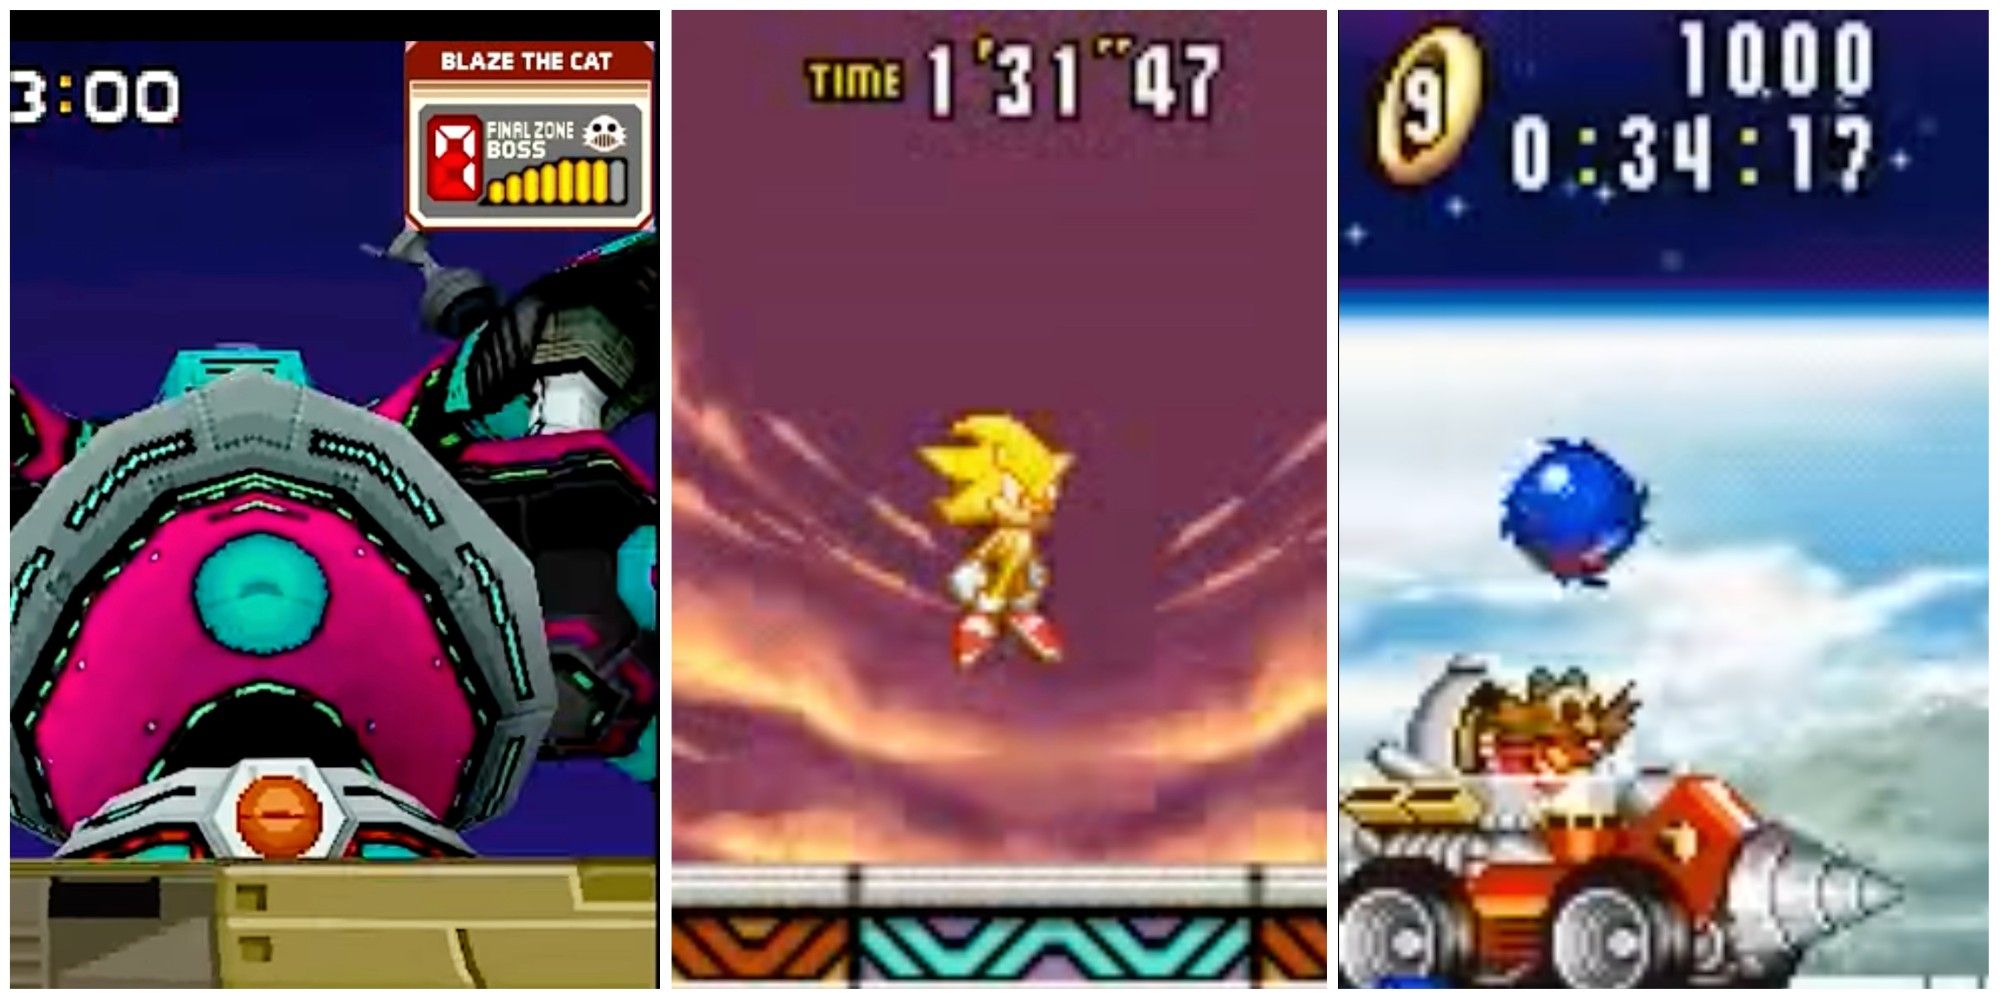 Every Sonic The Hedgehog game ever and in what order to play them -  Meristation